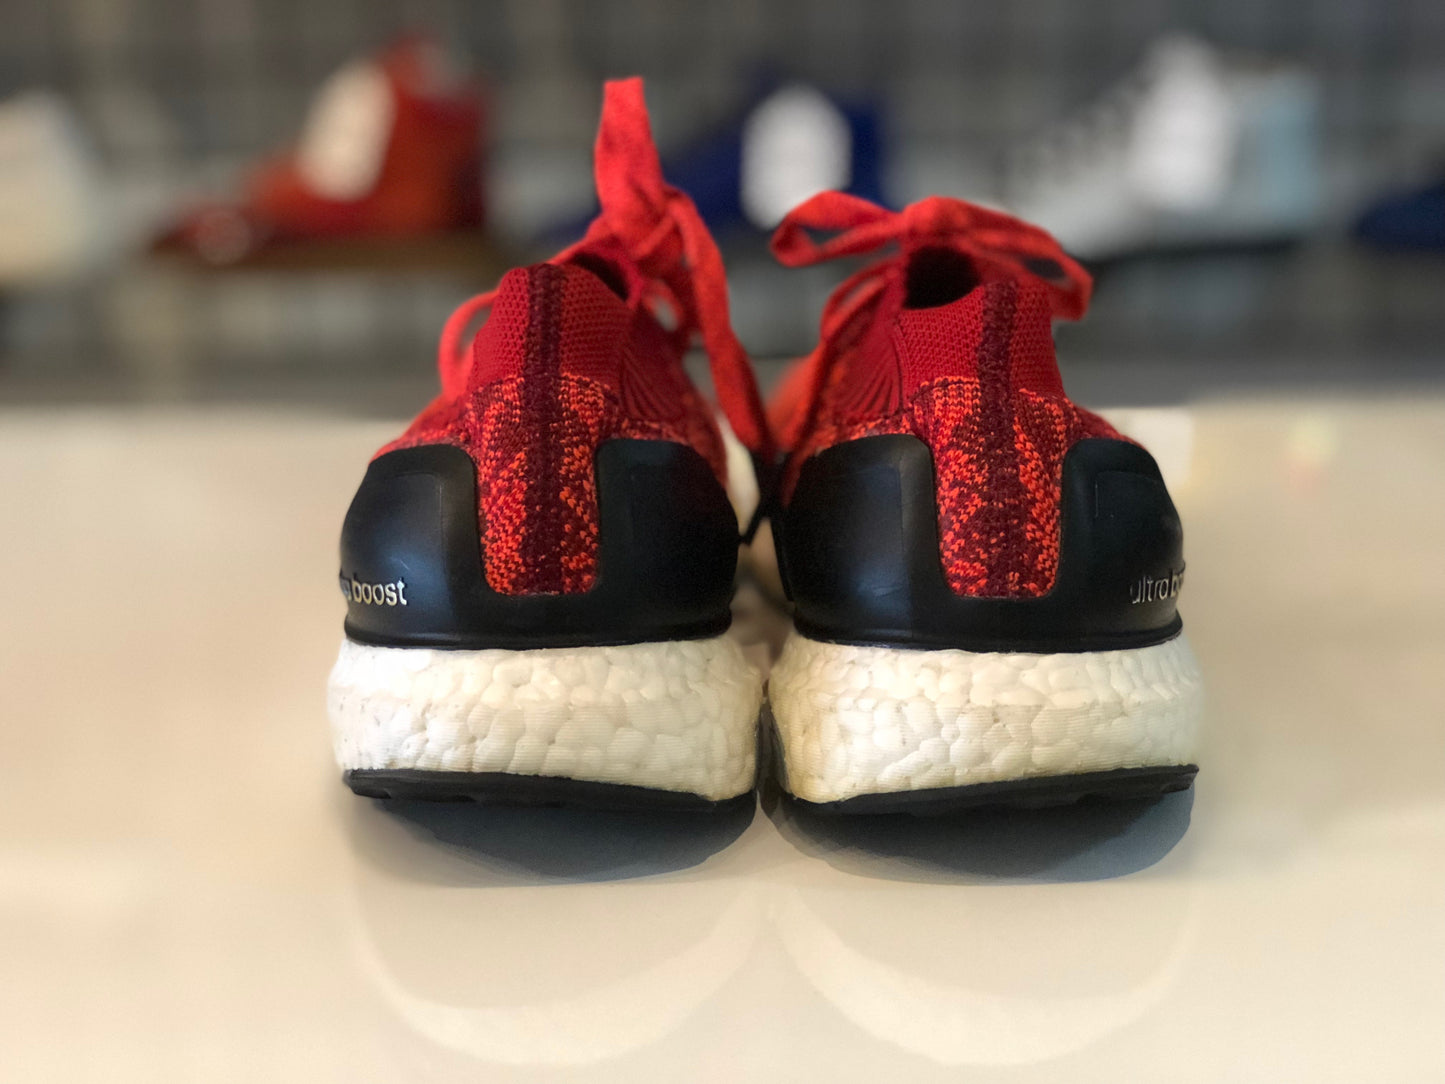 Adidas Ultra Boost Uncaged "Solar Red"